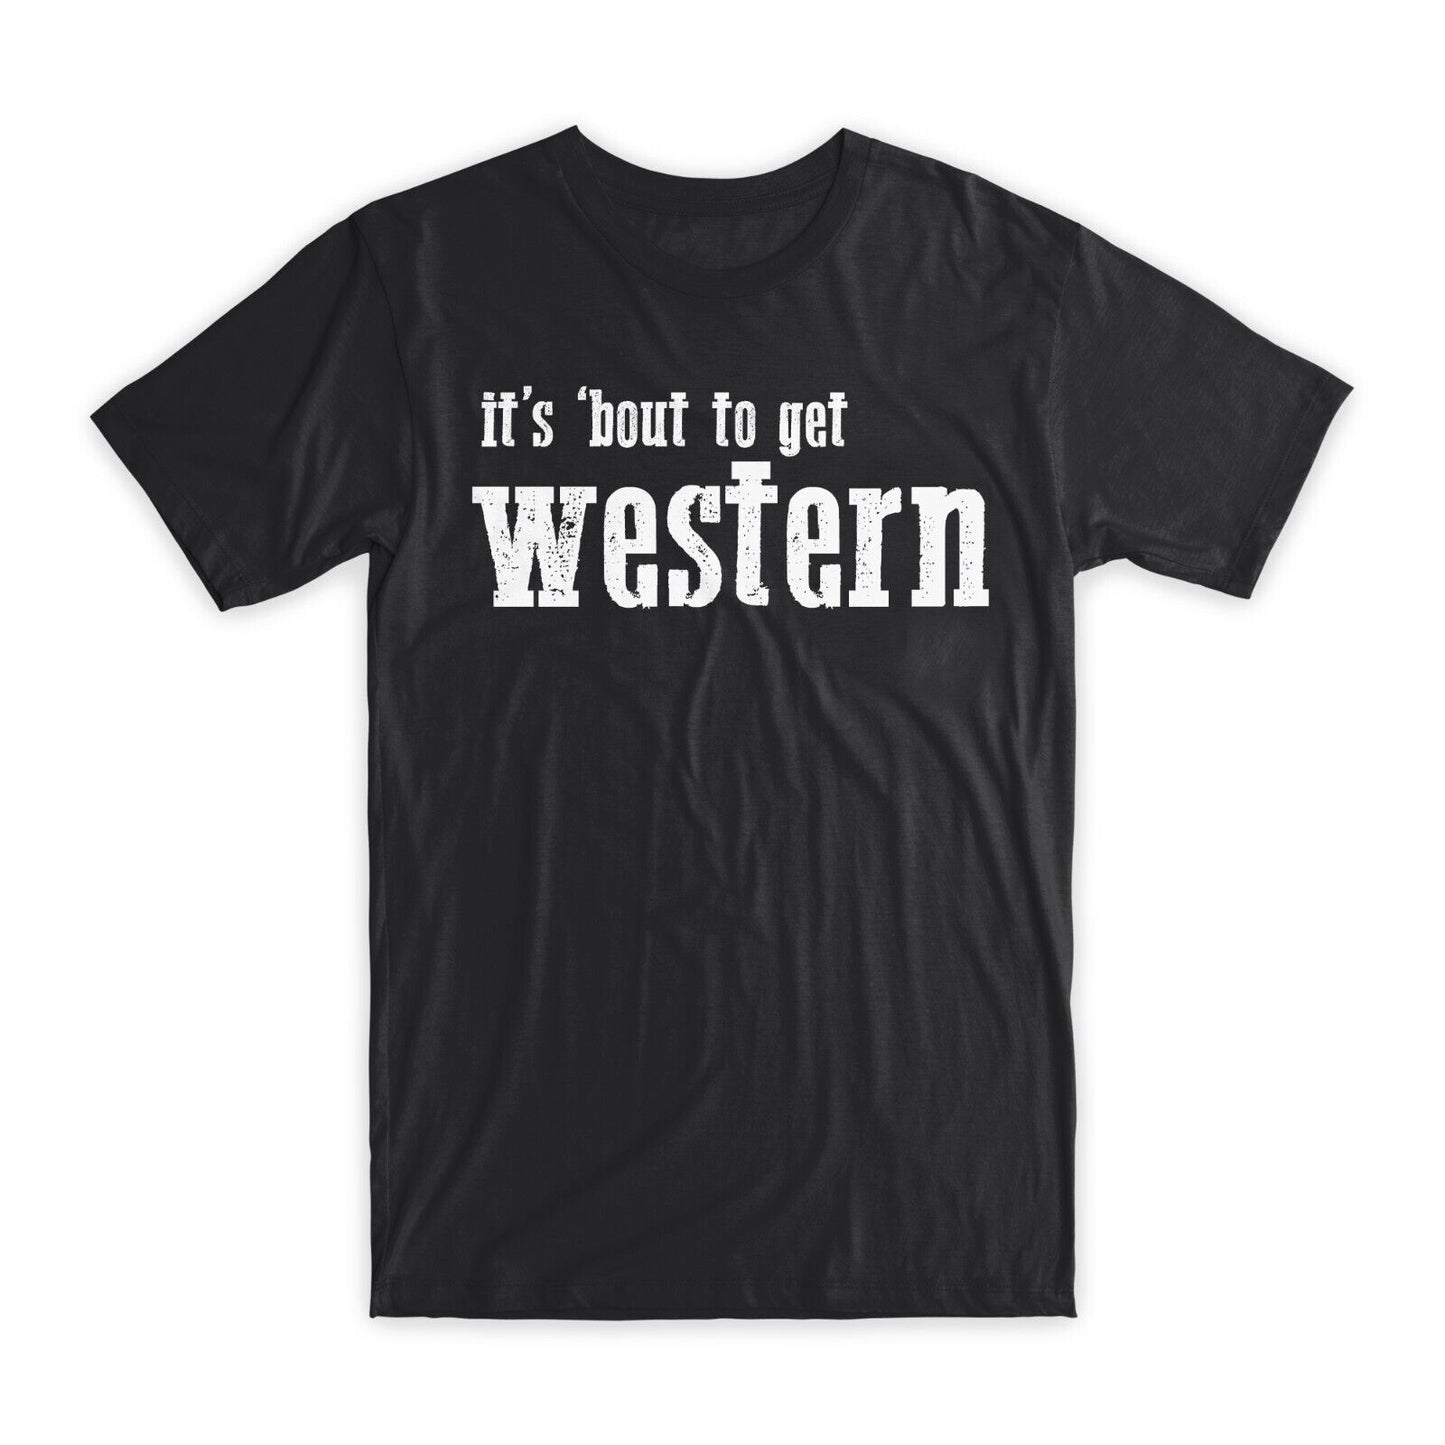 It's 'Bout To Get Western T-Shirt Premium Cotton Crew Neck Funny Tees Gifts NEW